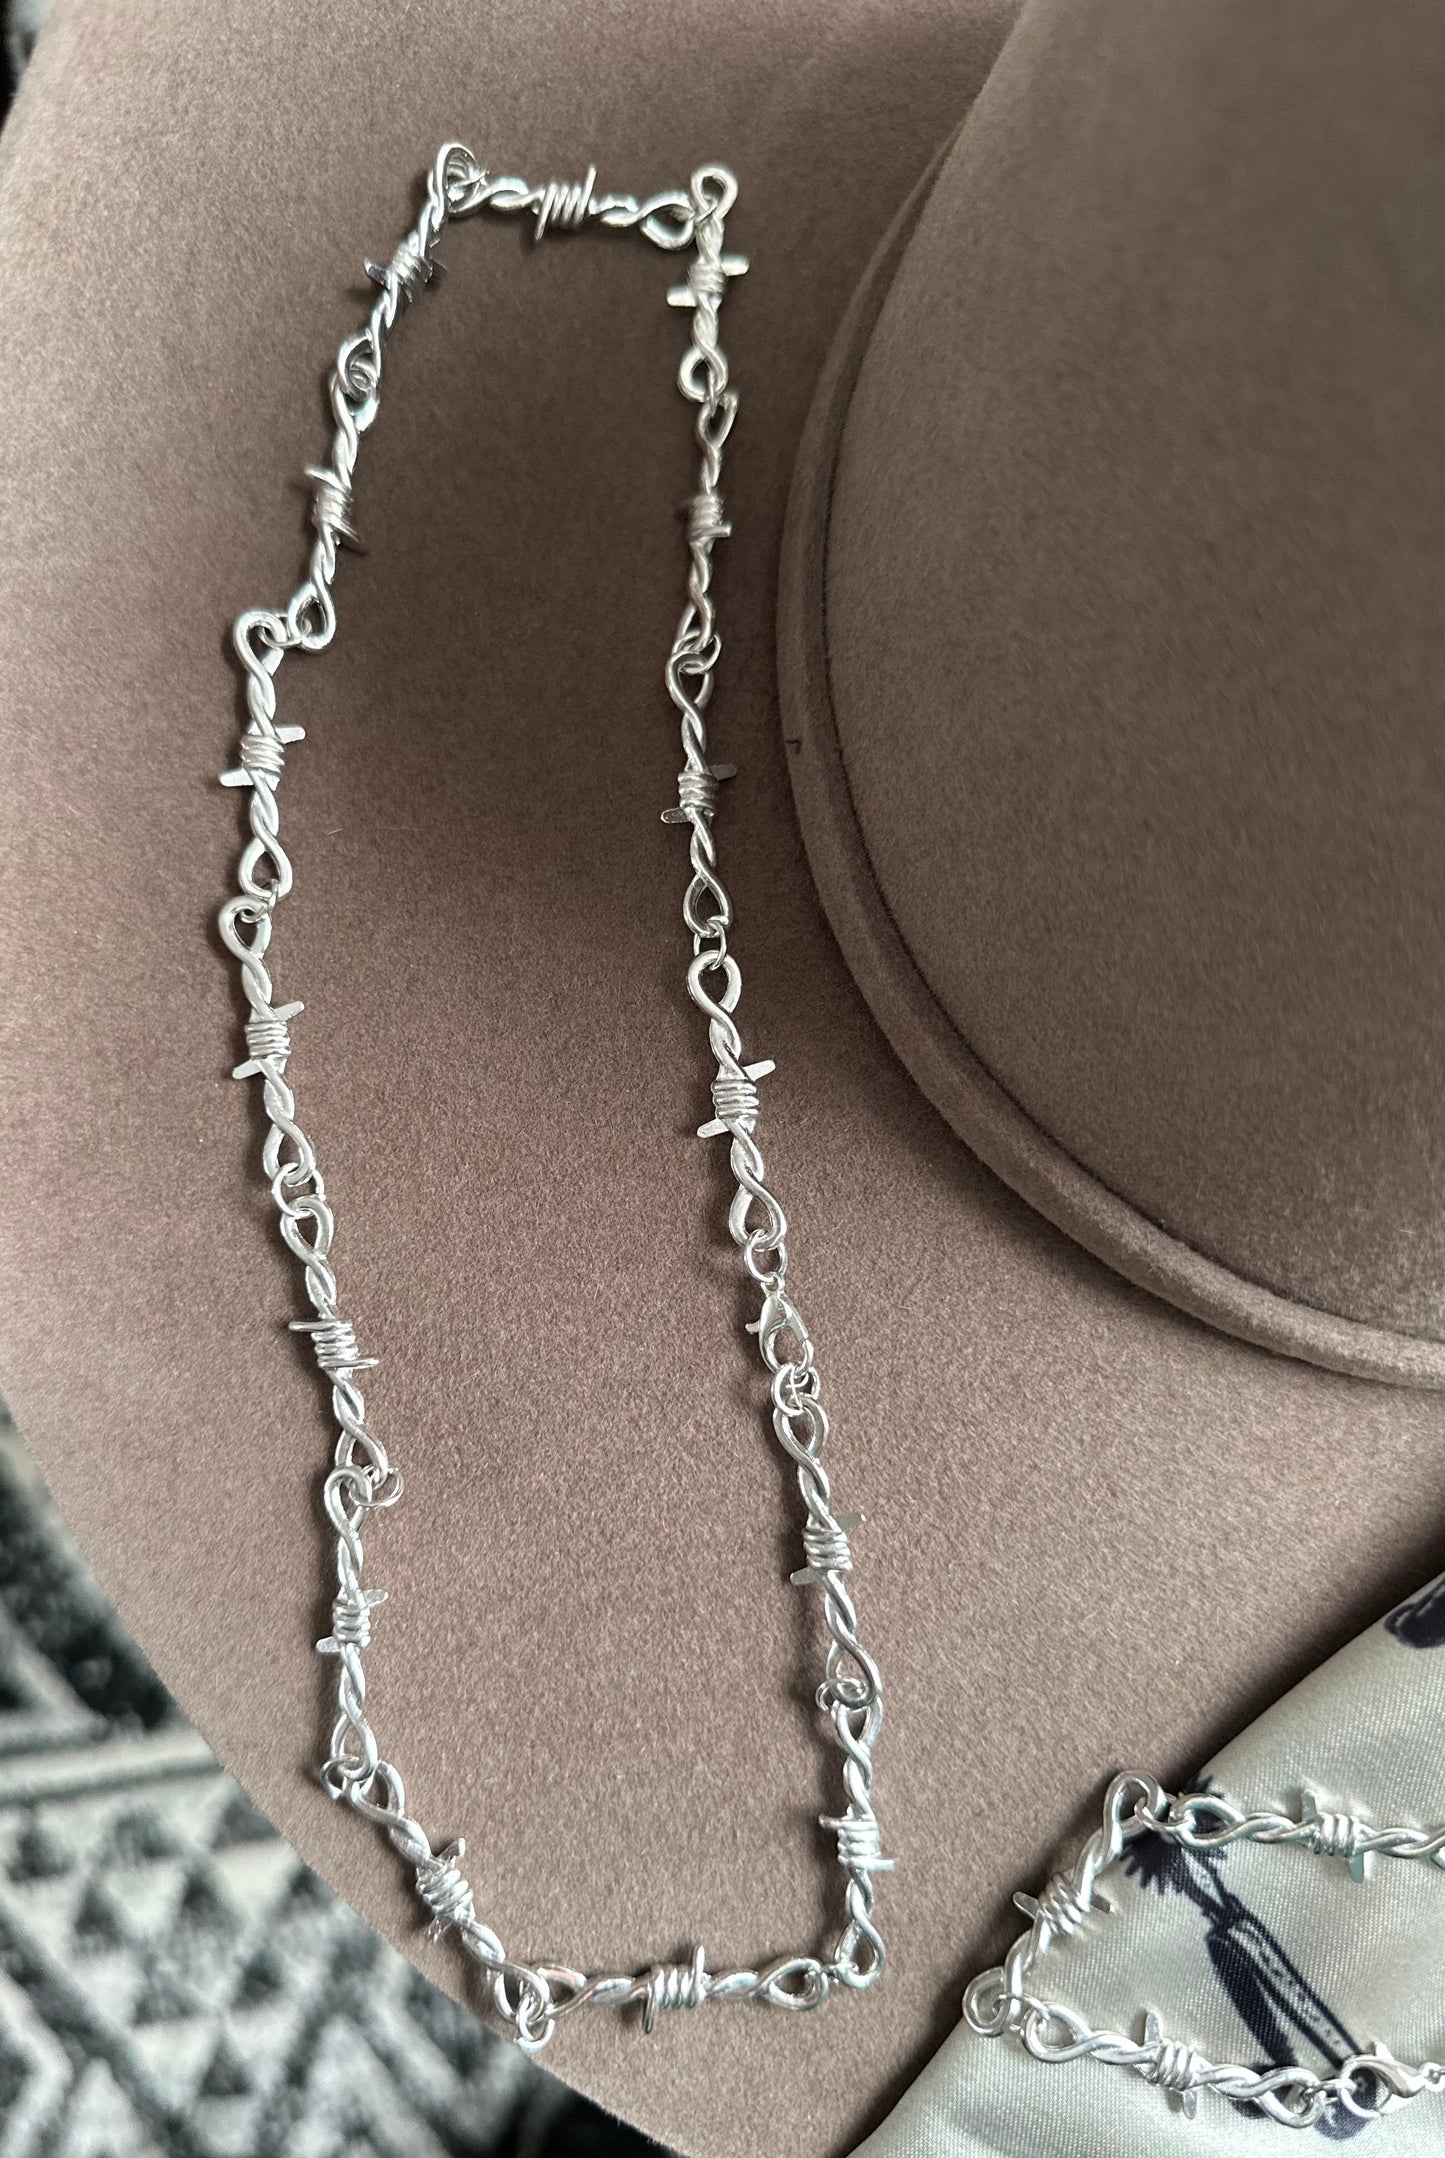 Barbed wire necklace